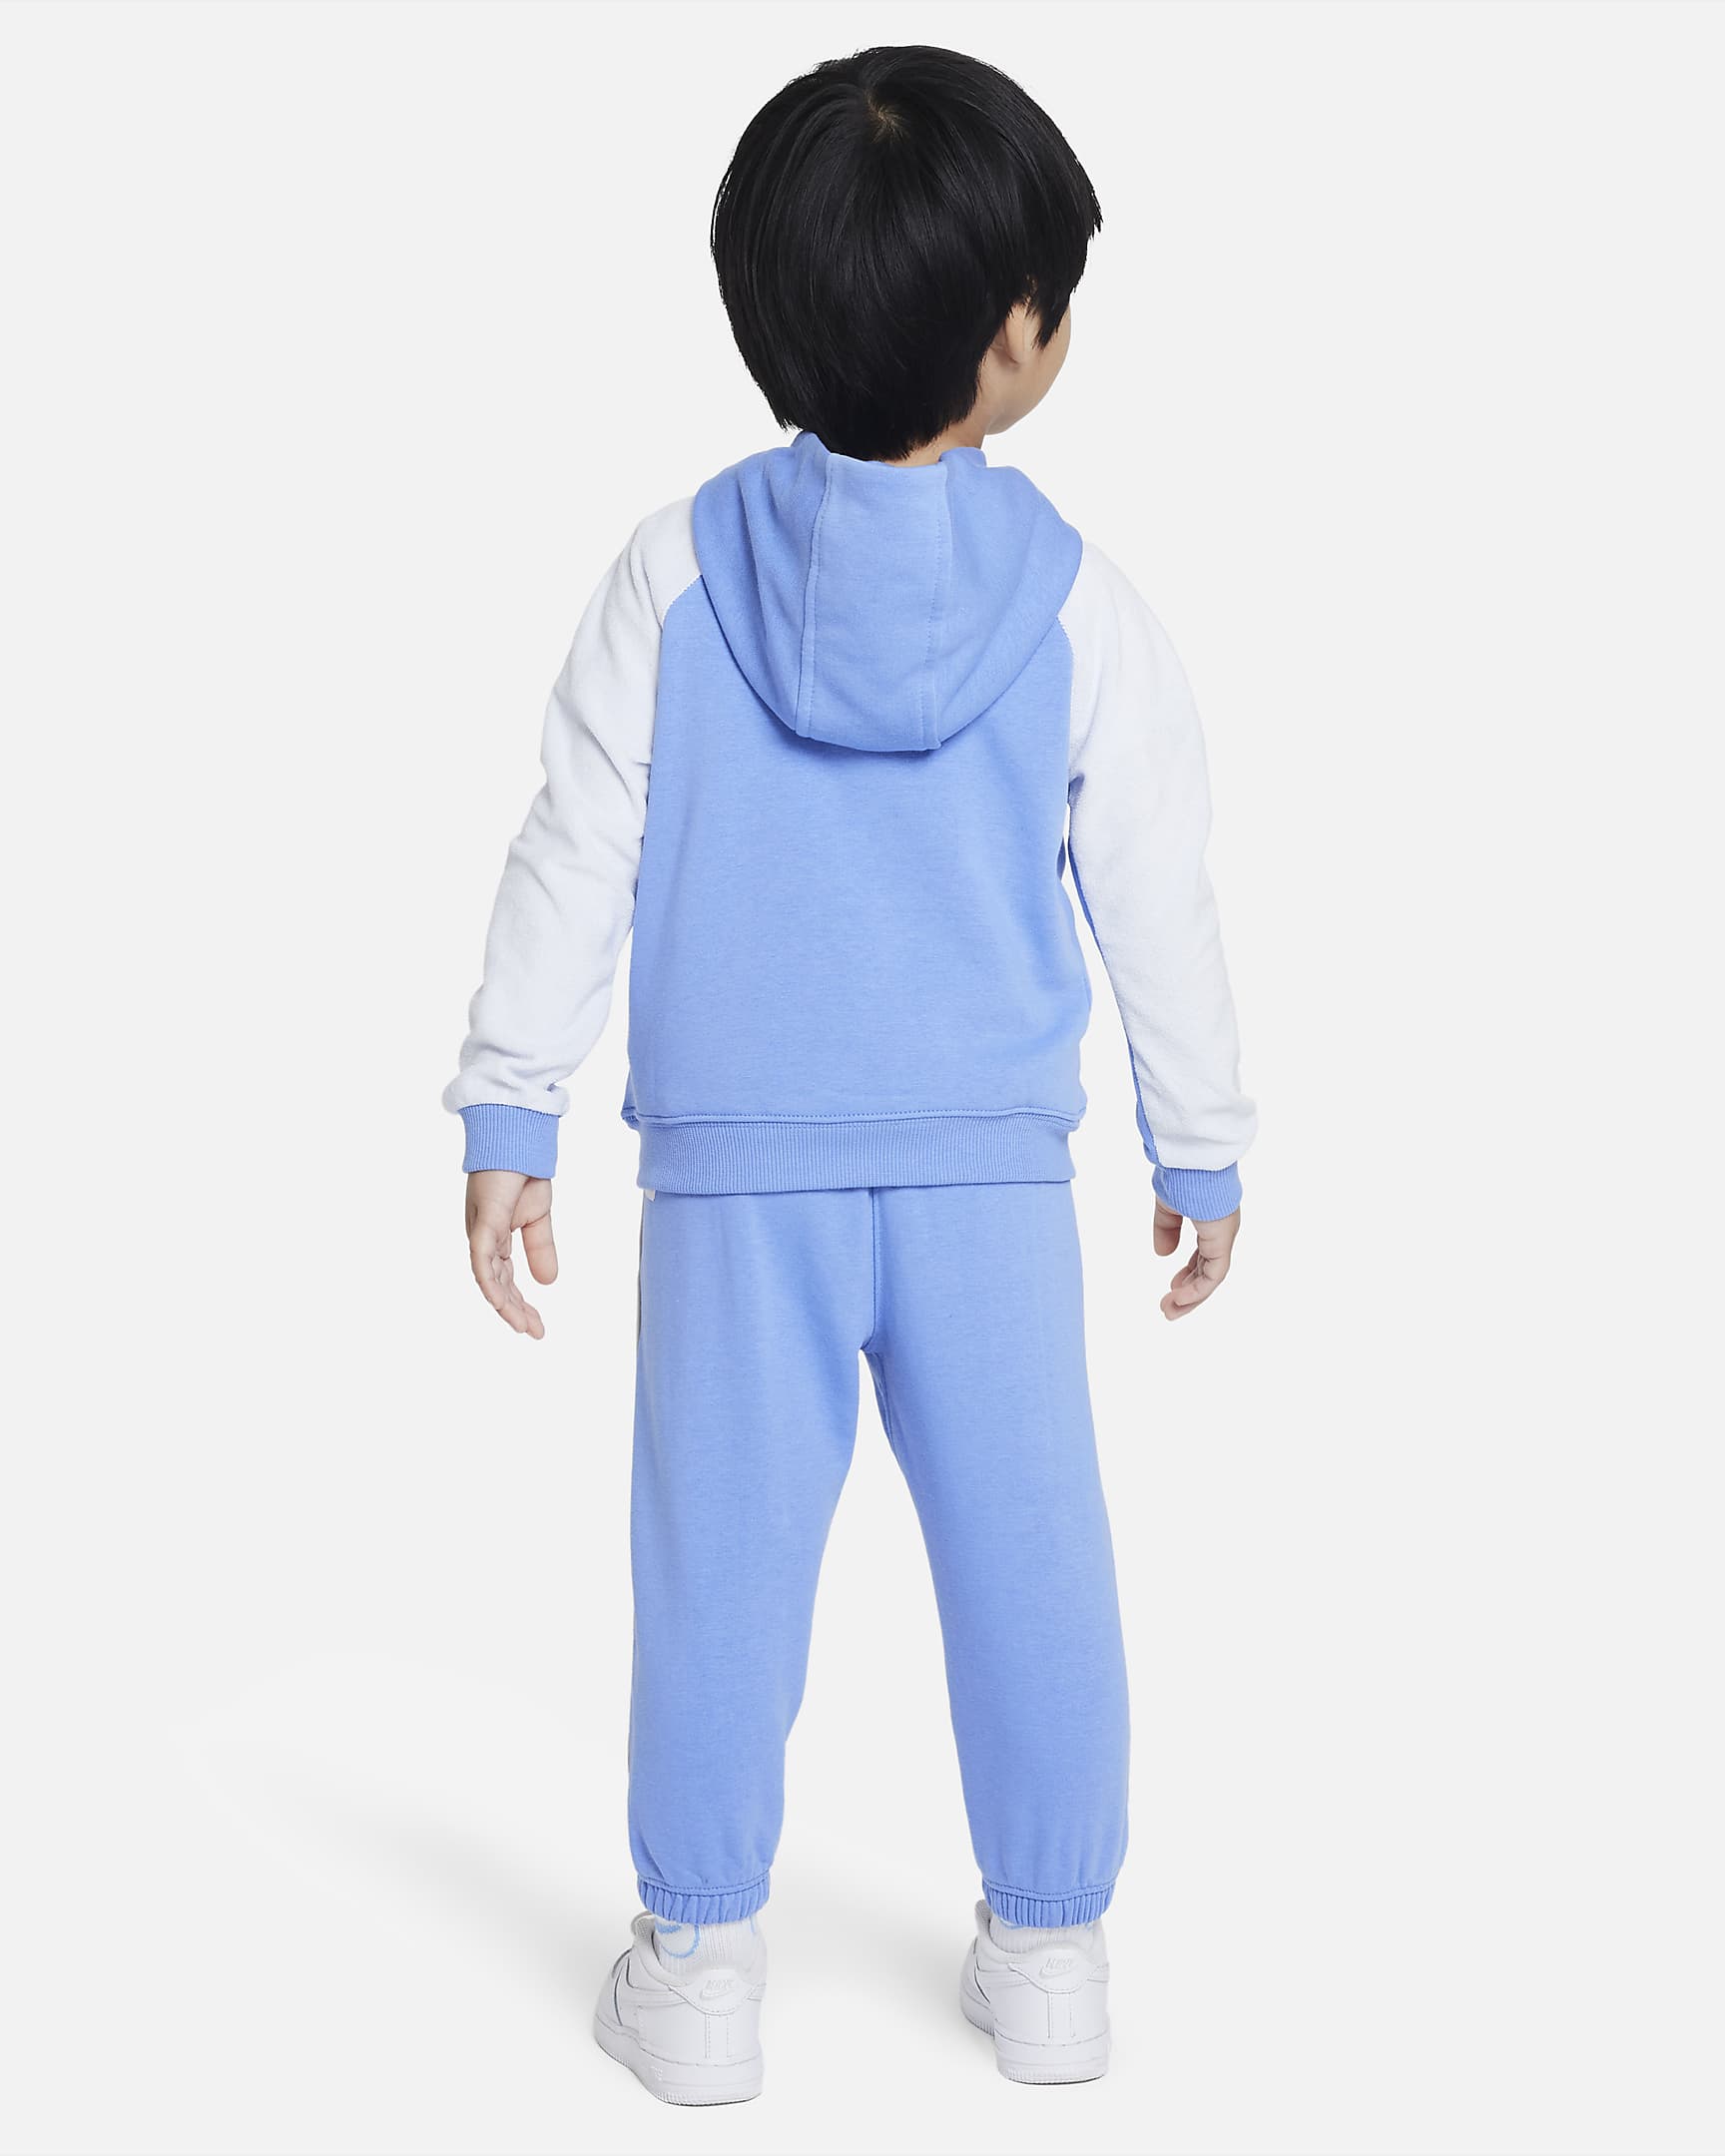 Nike Sportswear Amplify French Terry Pullover Set Toddler 2-Piece ...